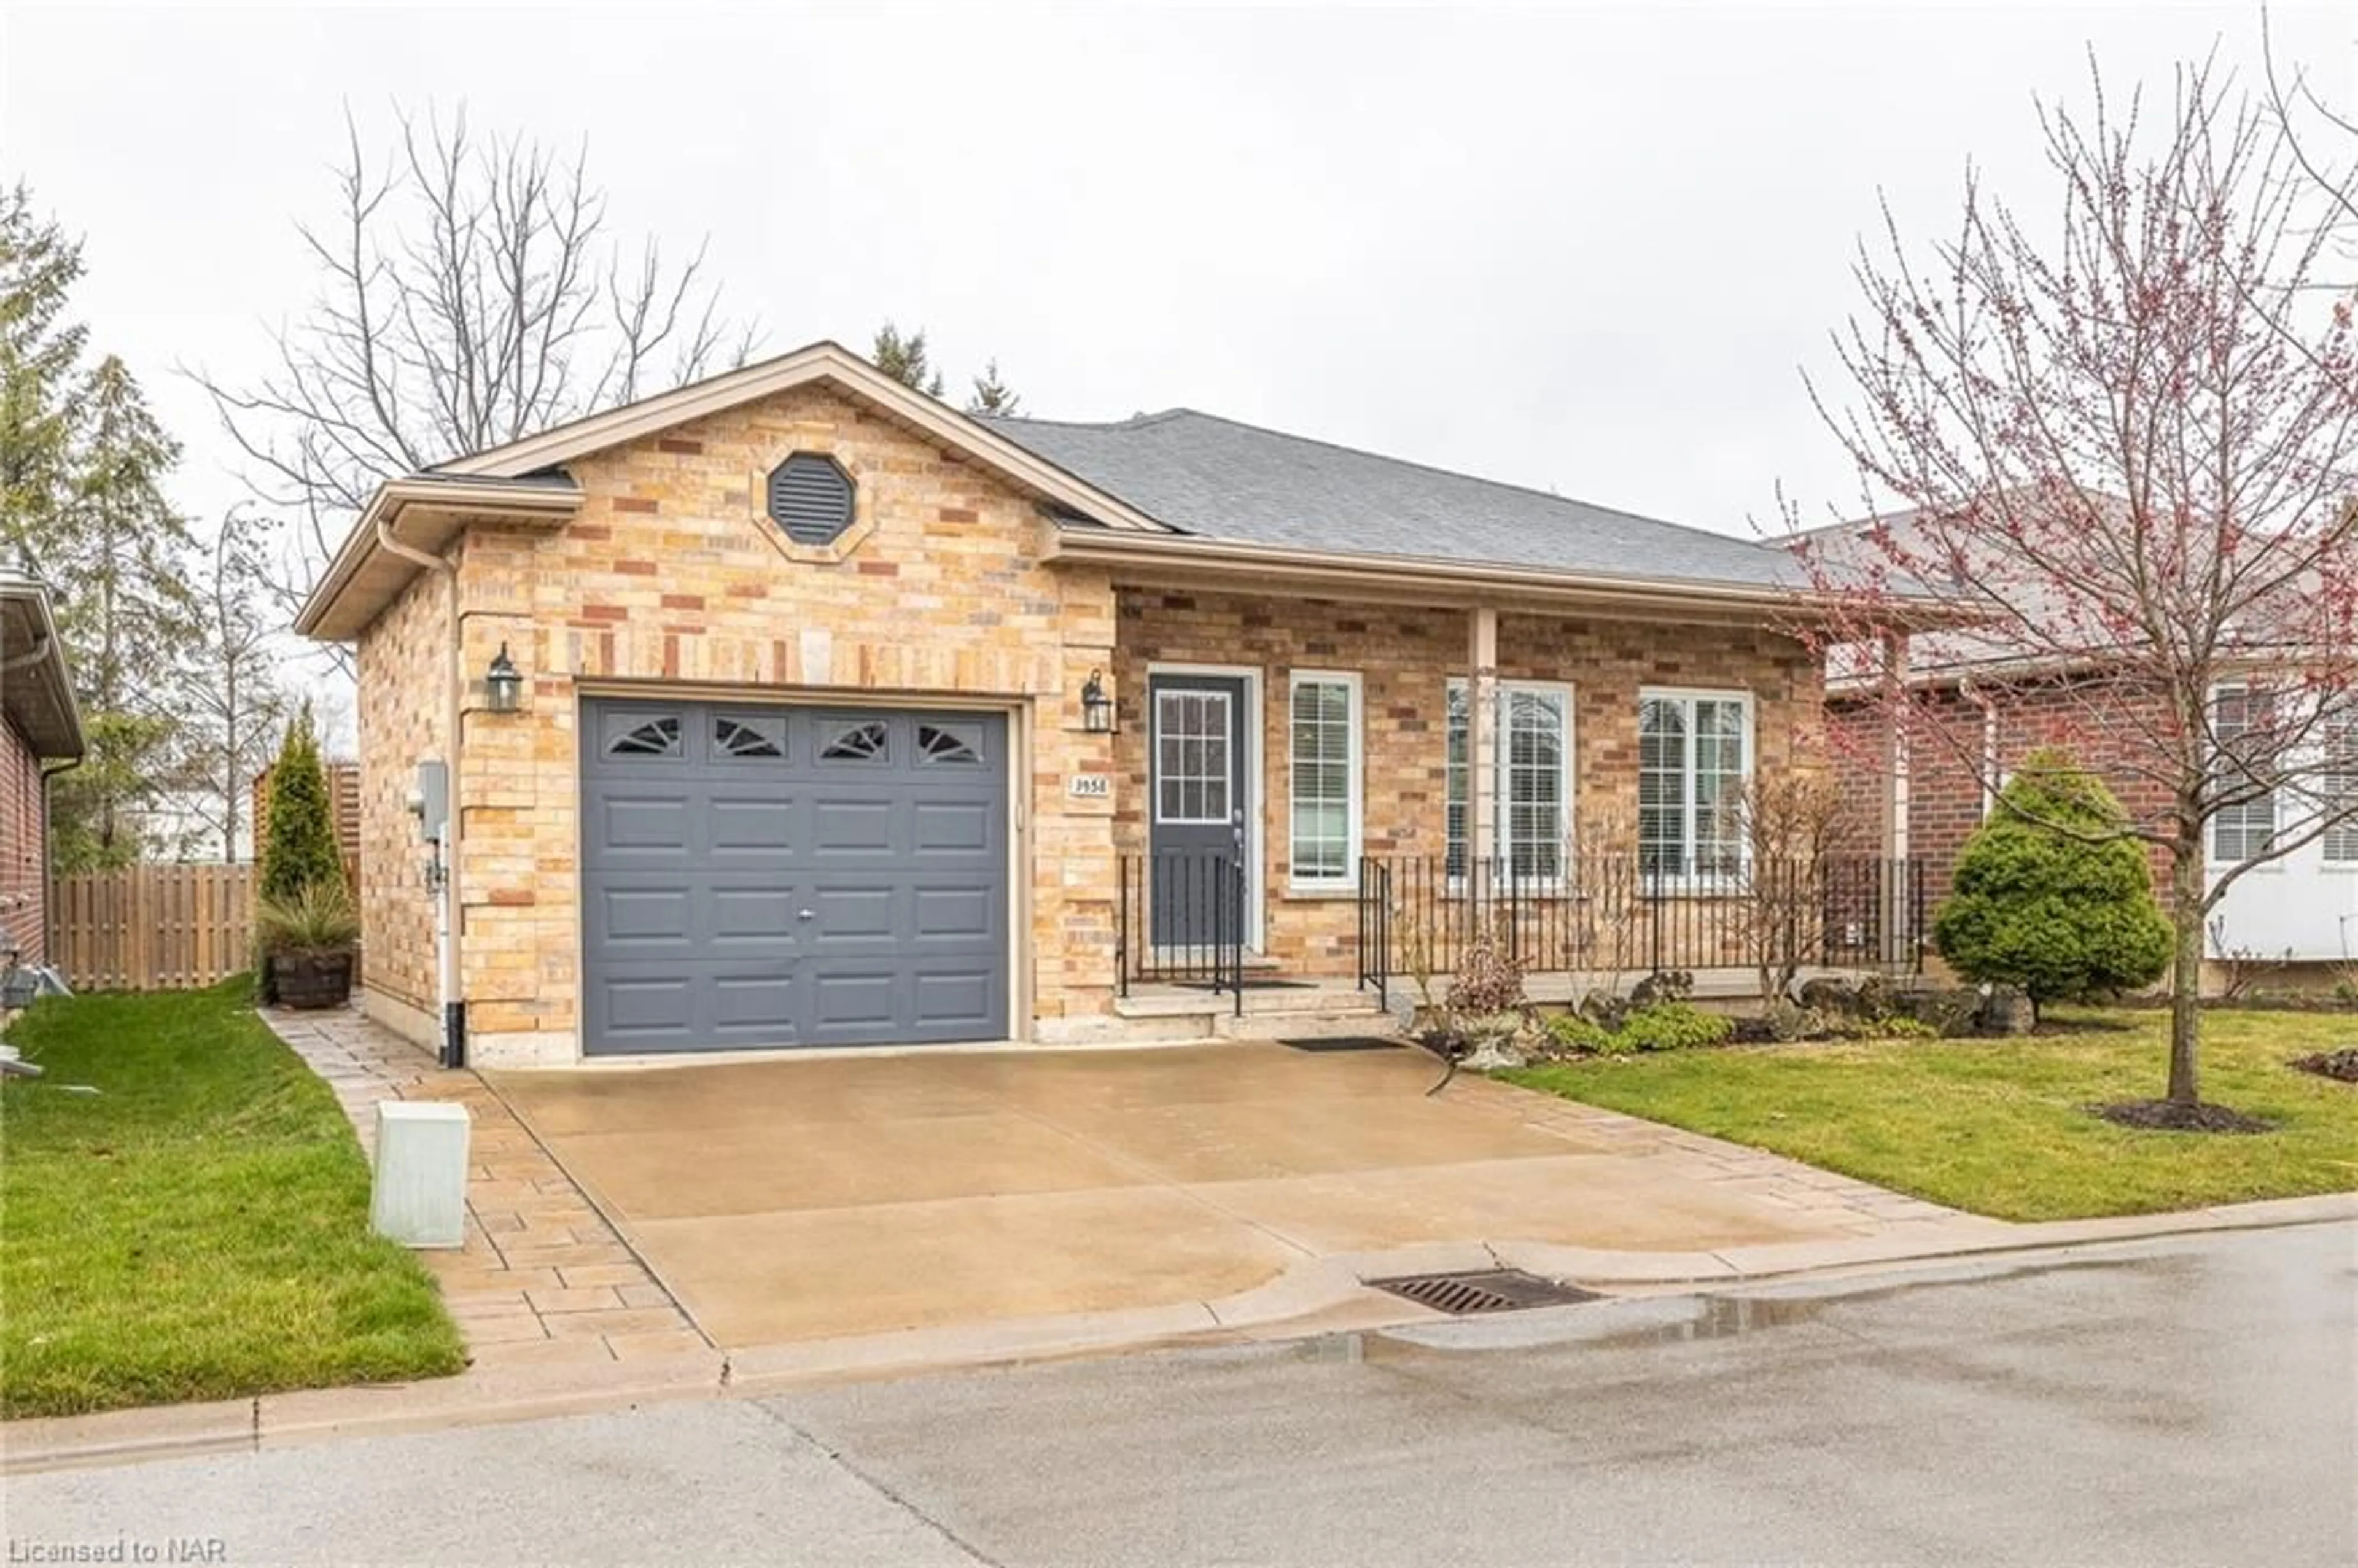 Home with brick exterior material for 3958 Durban Lane, Vineland Ontario L0R 2C0